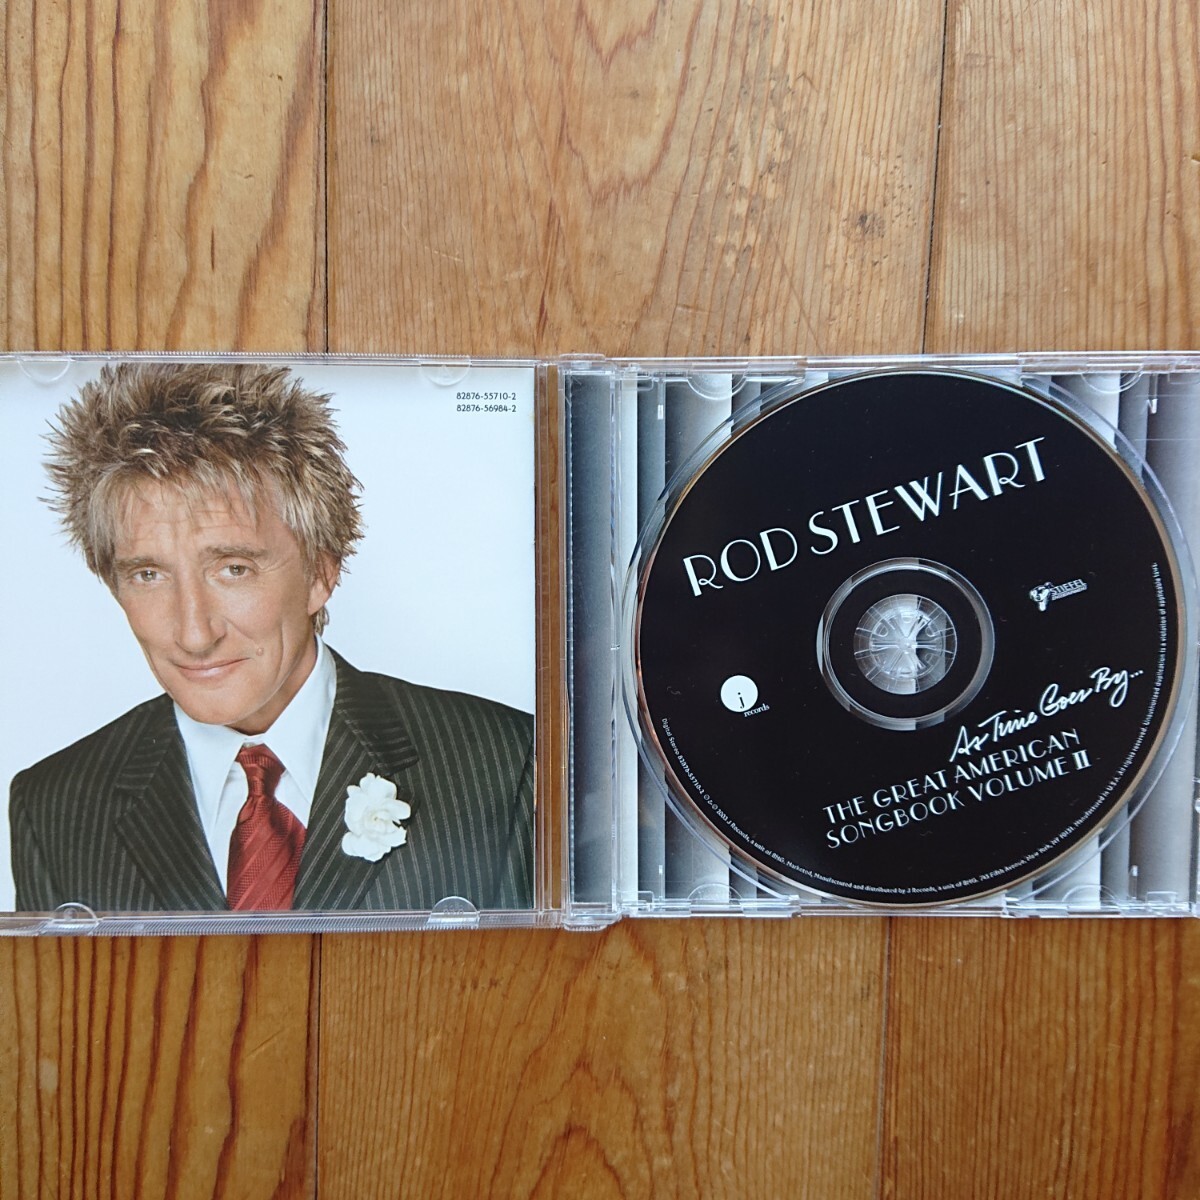 Rod Stewart/As Time Goes By...The Great American Songbook, Vol. 2（ロッド・スチュワート/グレイト・アメリカン・ソングブック vol.2）の画像3